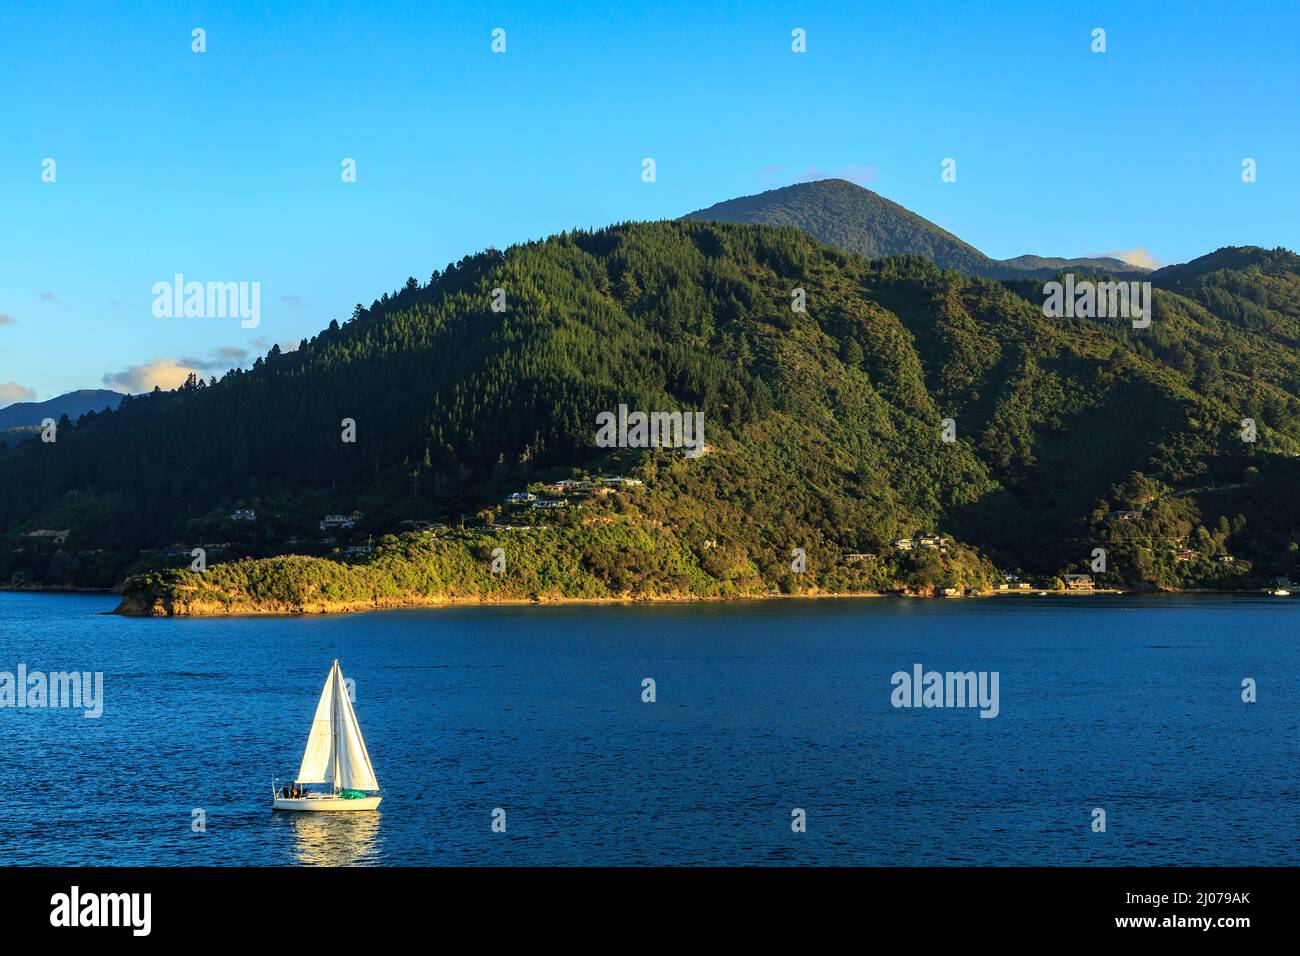 A yacht cruising along the mountainous coastline of Queen Charlotte Sound in the Marlborough Sounds, New Zealand Stock Photo